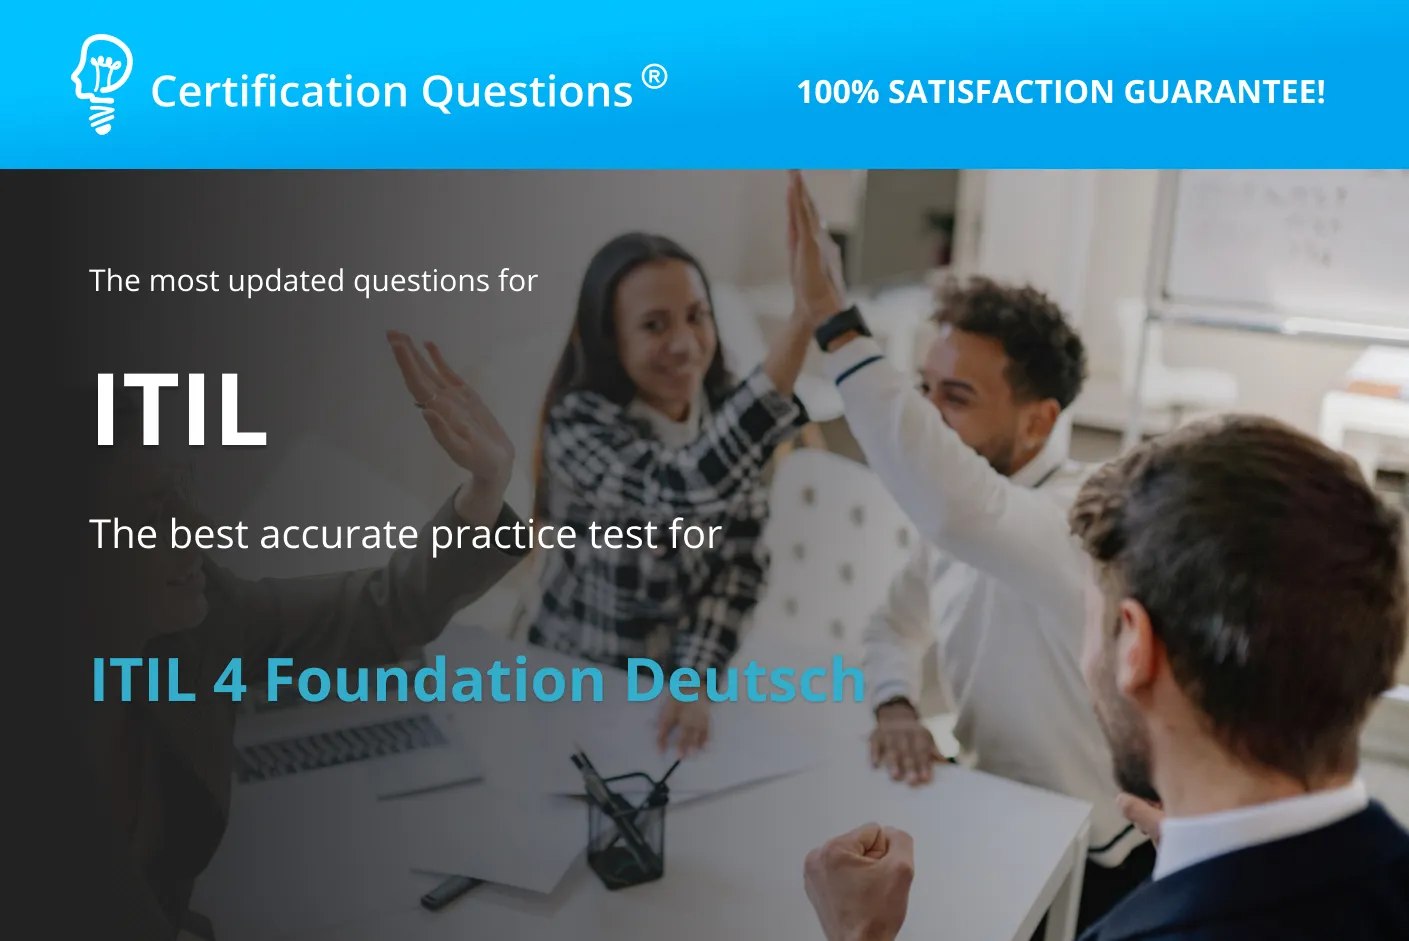 Here is the image for the ITIL 4 Foundation practice test in the United States of America.